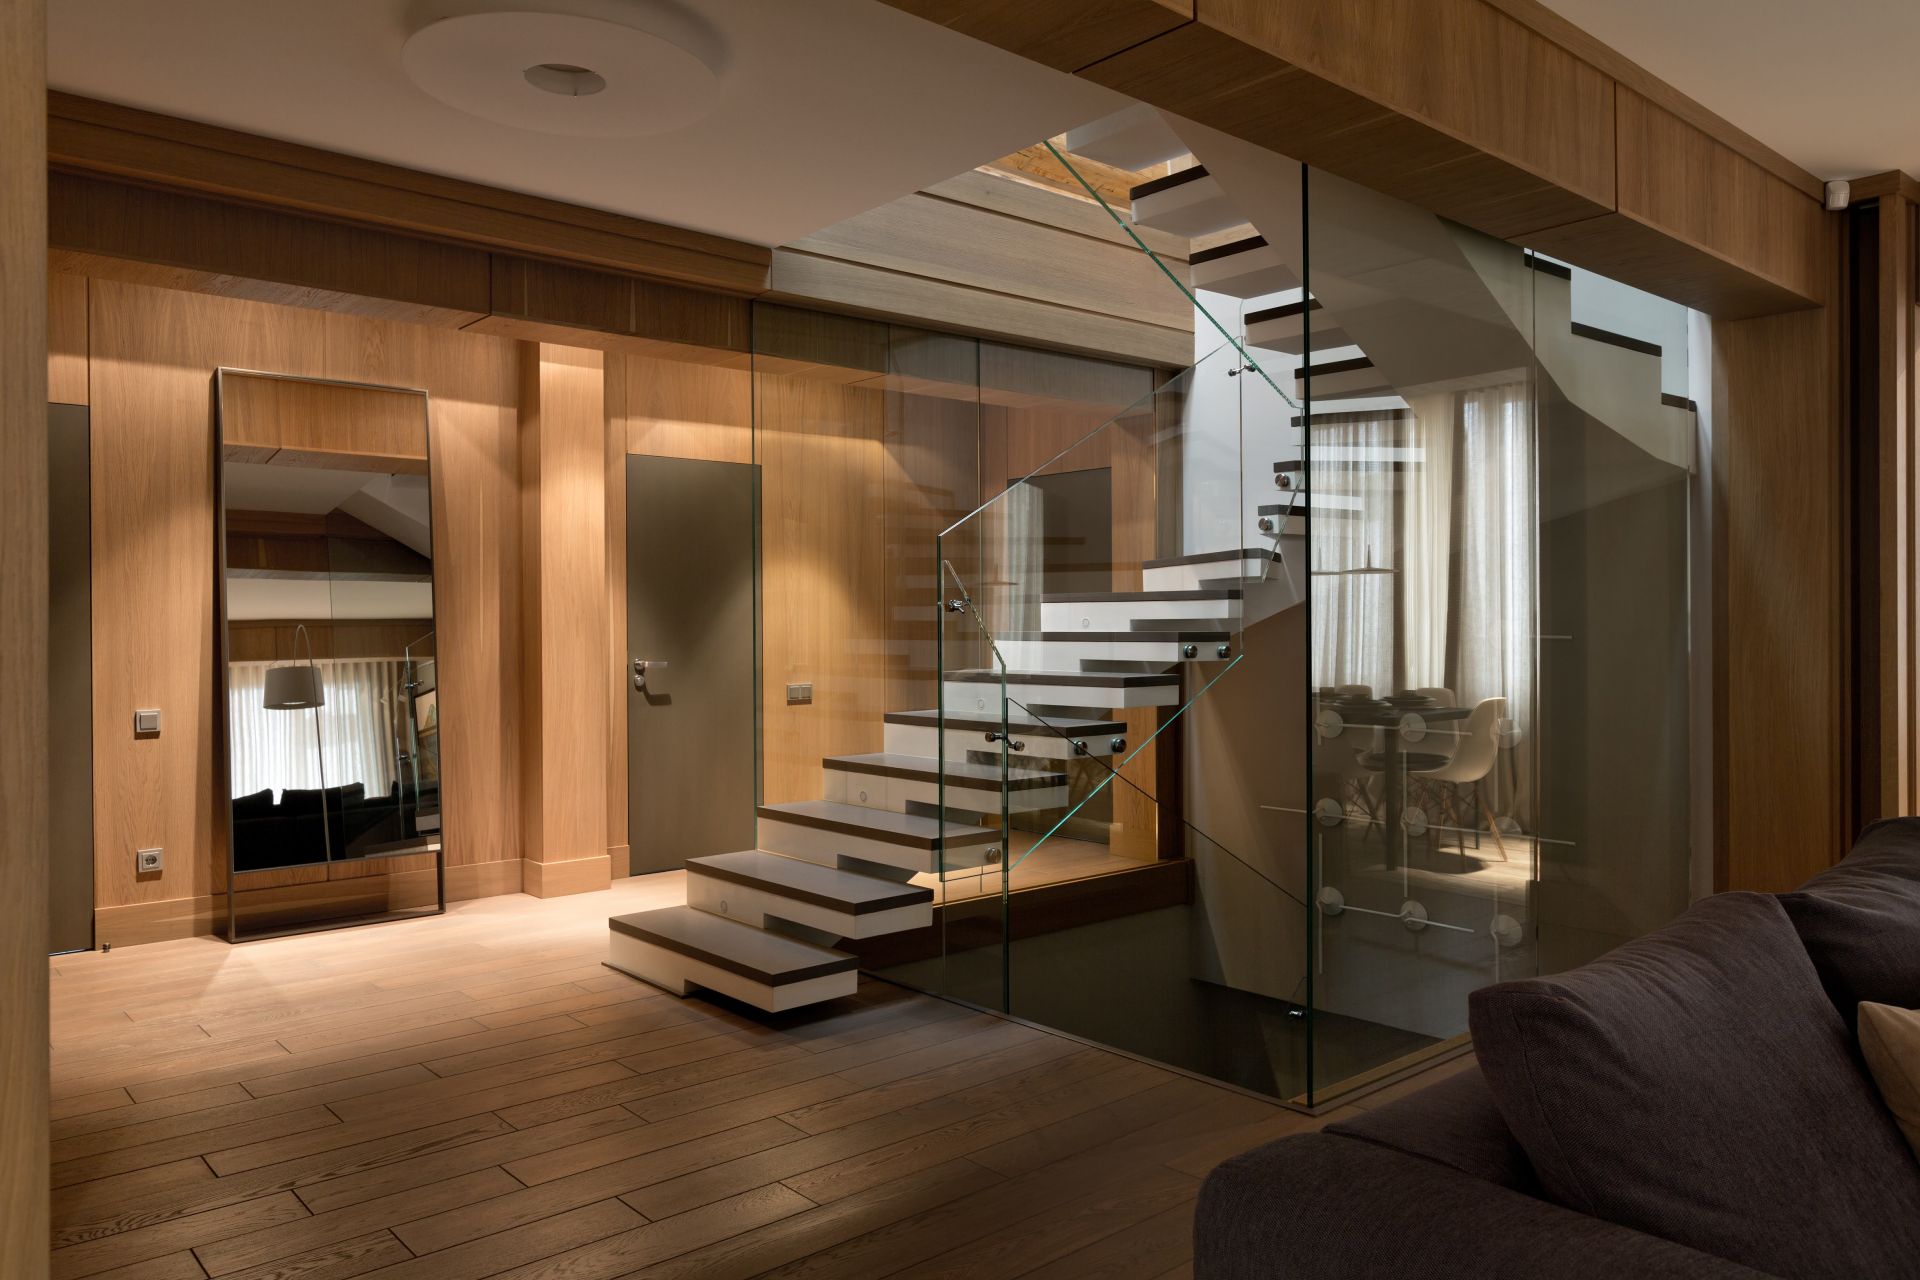 Staircase with glass railing